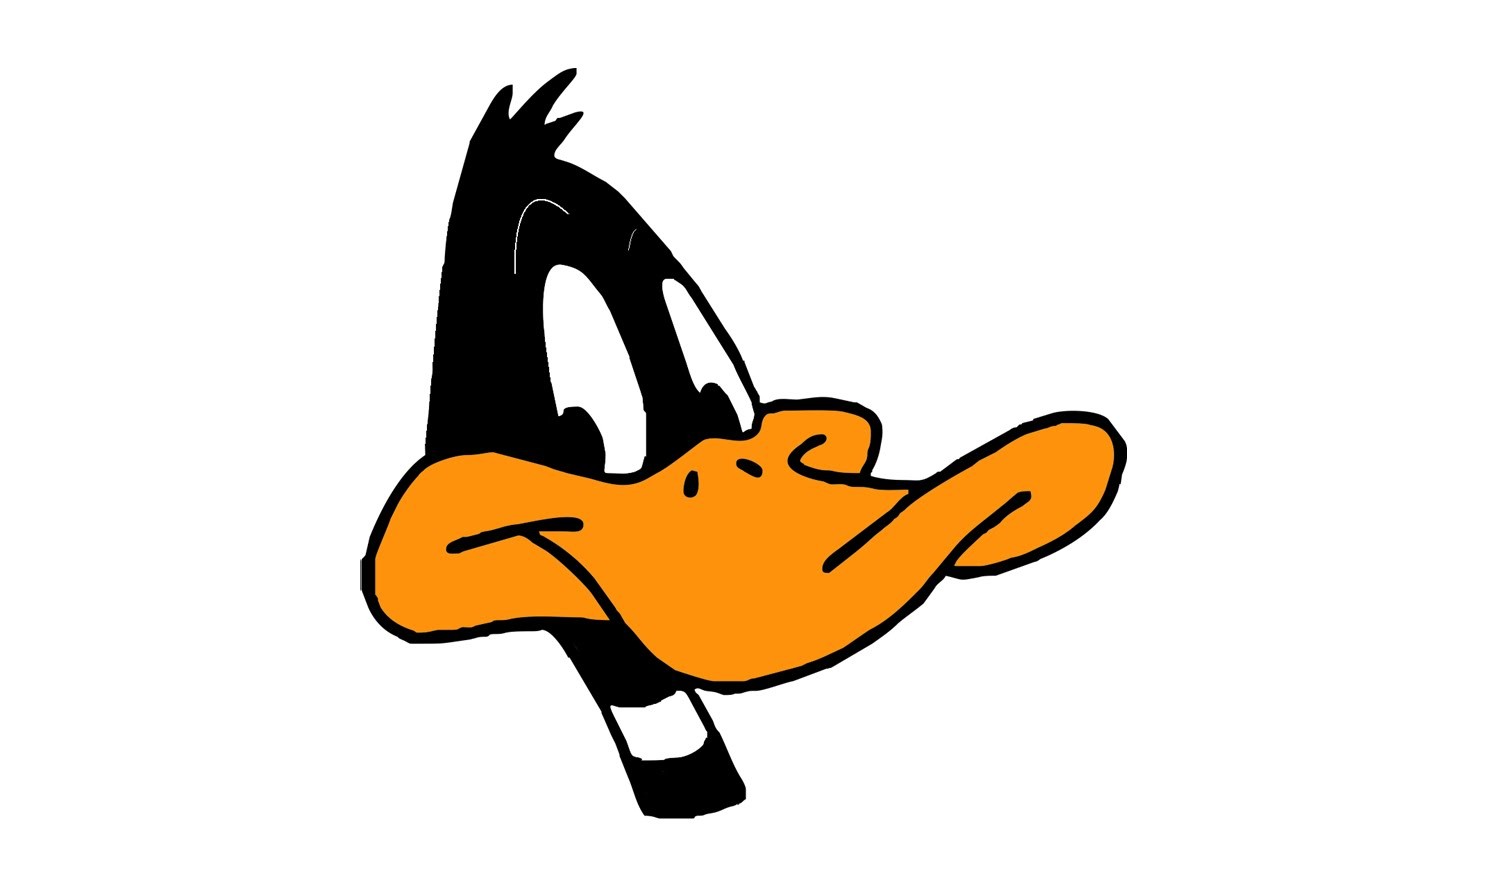 How,to,Draw,Daffy,Duck,from,Looney,Tunes,Step,by,Step,INSTAGRAM:,..,How,to,...